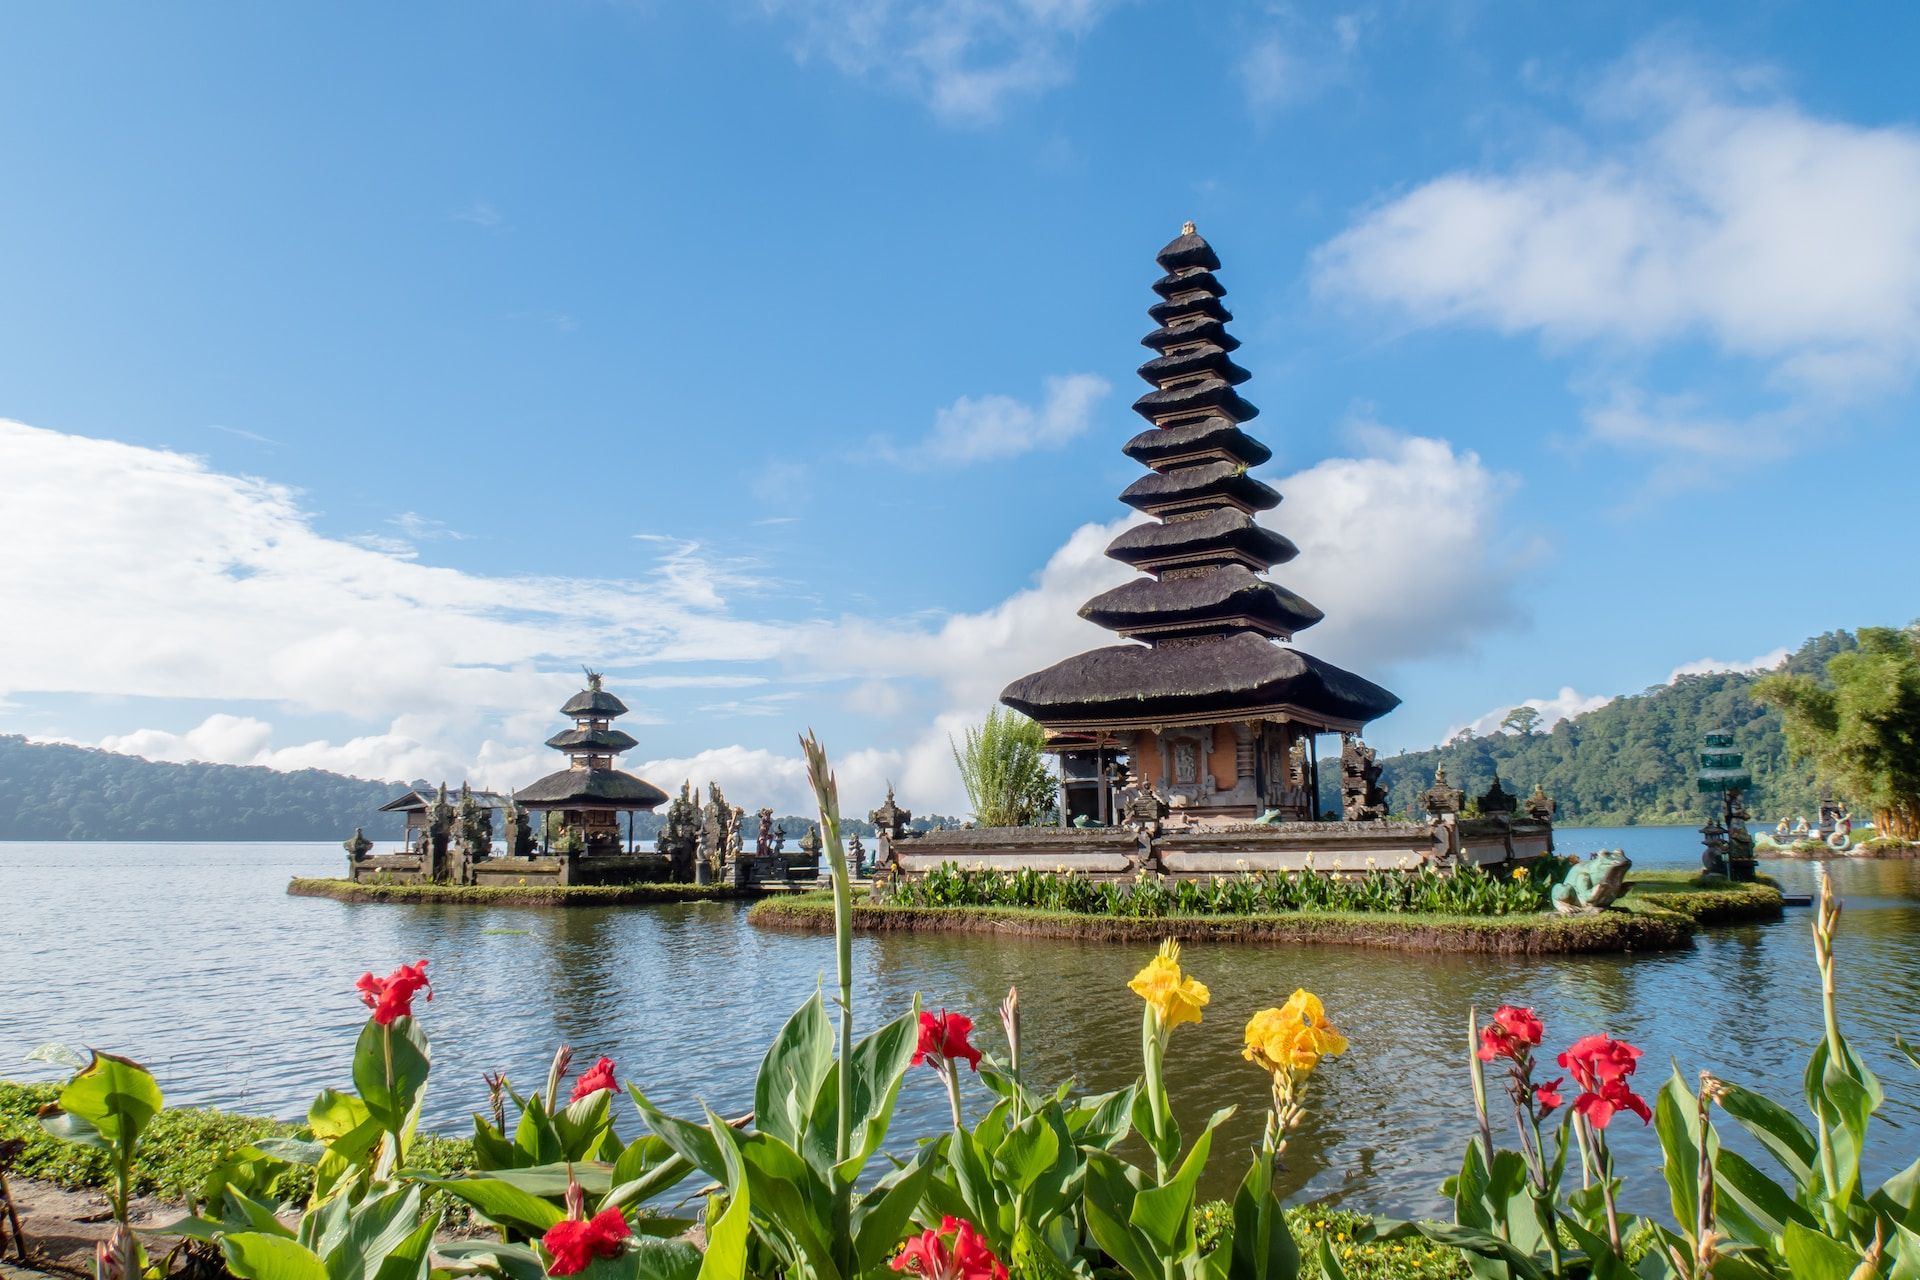 Temple on the water in Bali, Indonesia